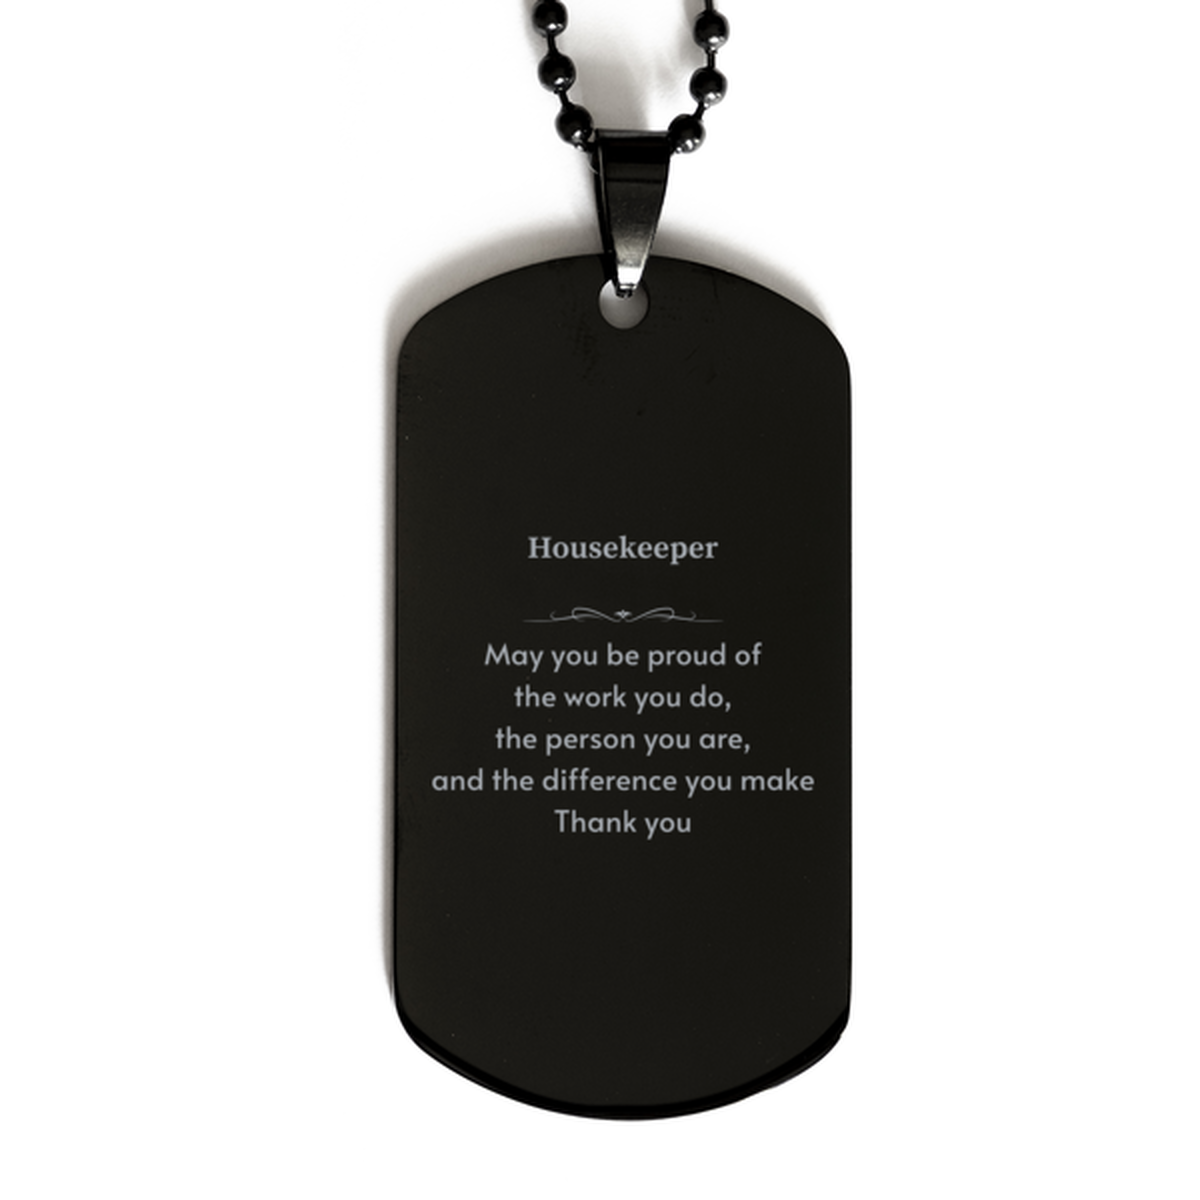 Heartwarming Black Dog Tag Retirement Coworkers Gifts for Housekeeper, Housekeeper May You be proud of the work you do, the person you are Gifts for Boss Men Women Friends